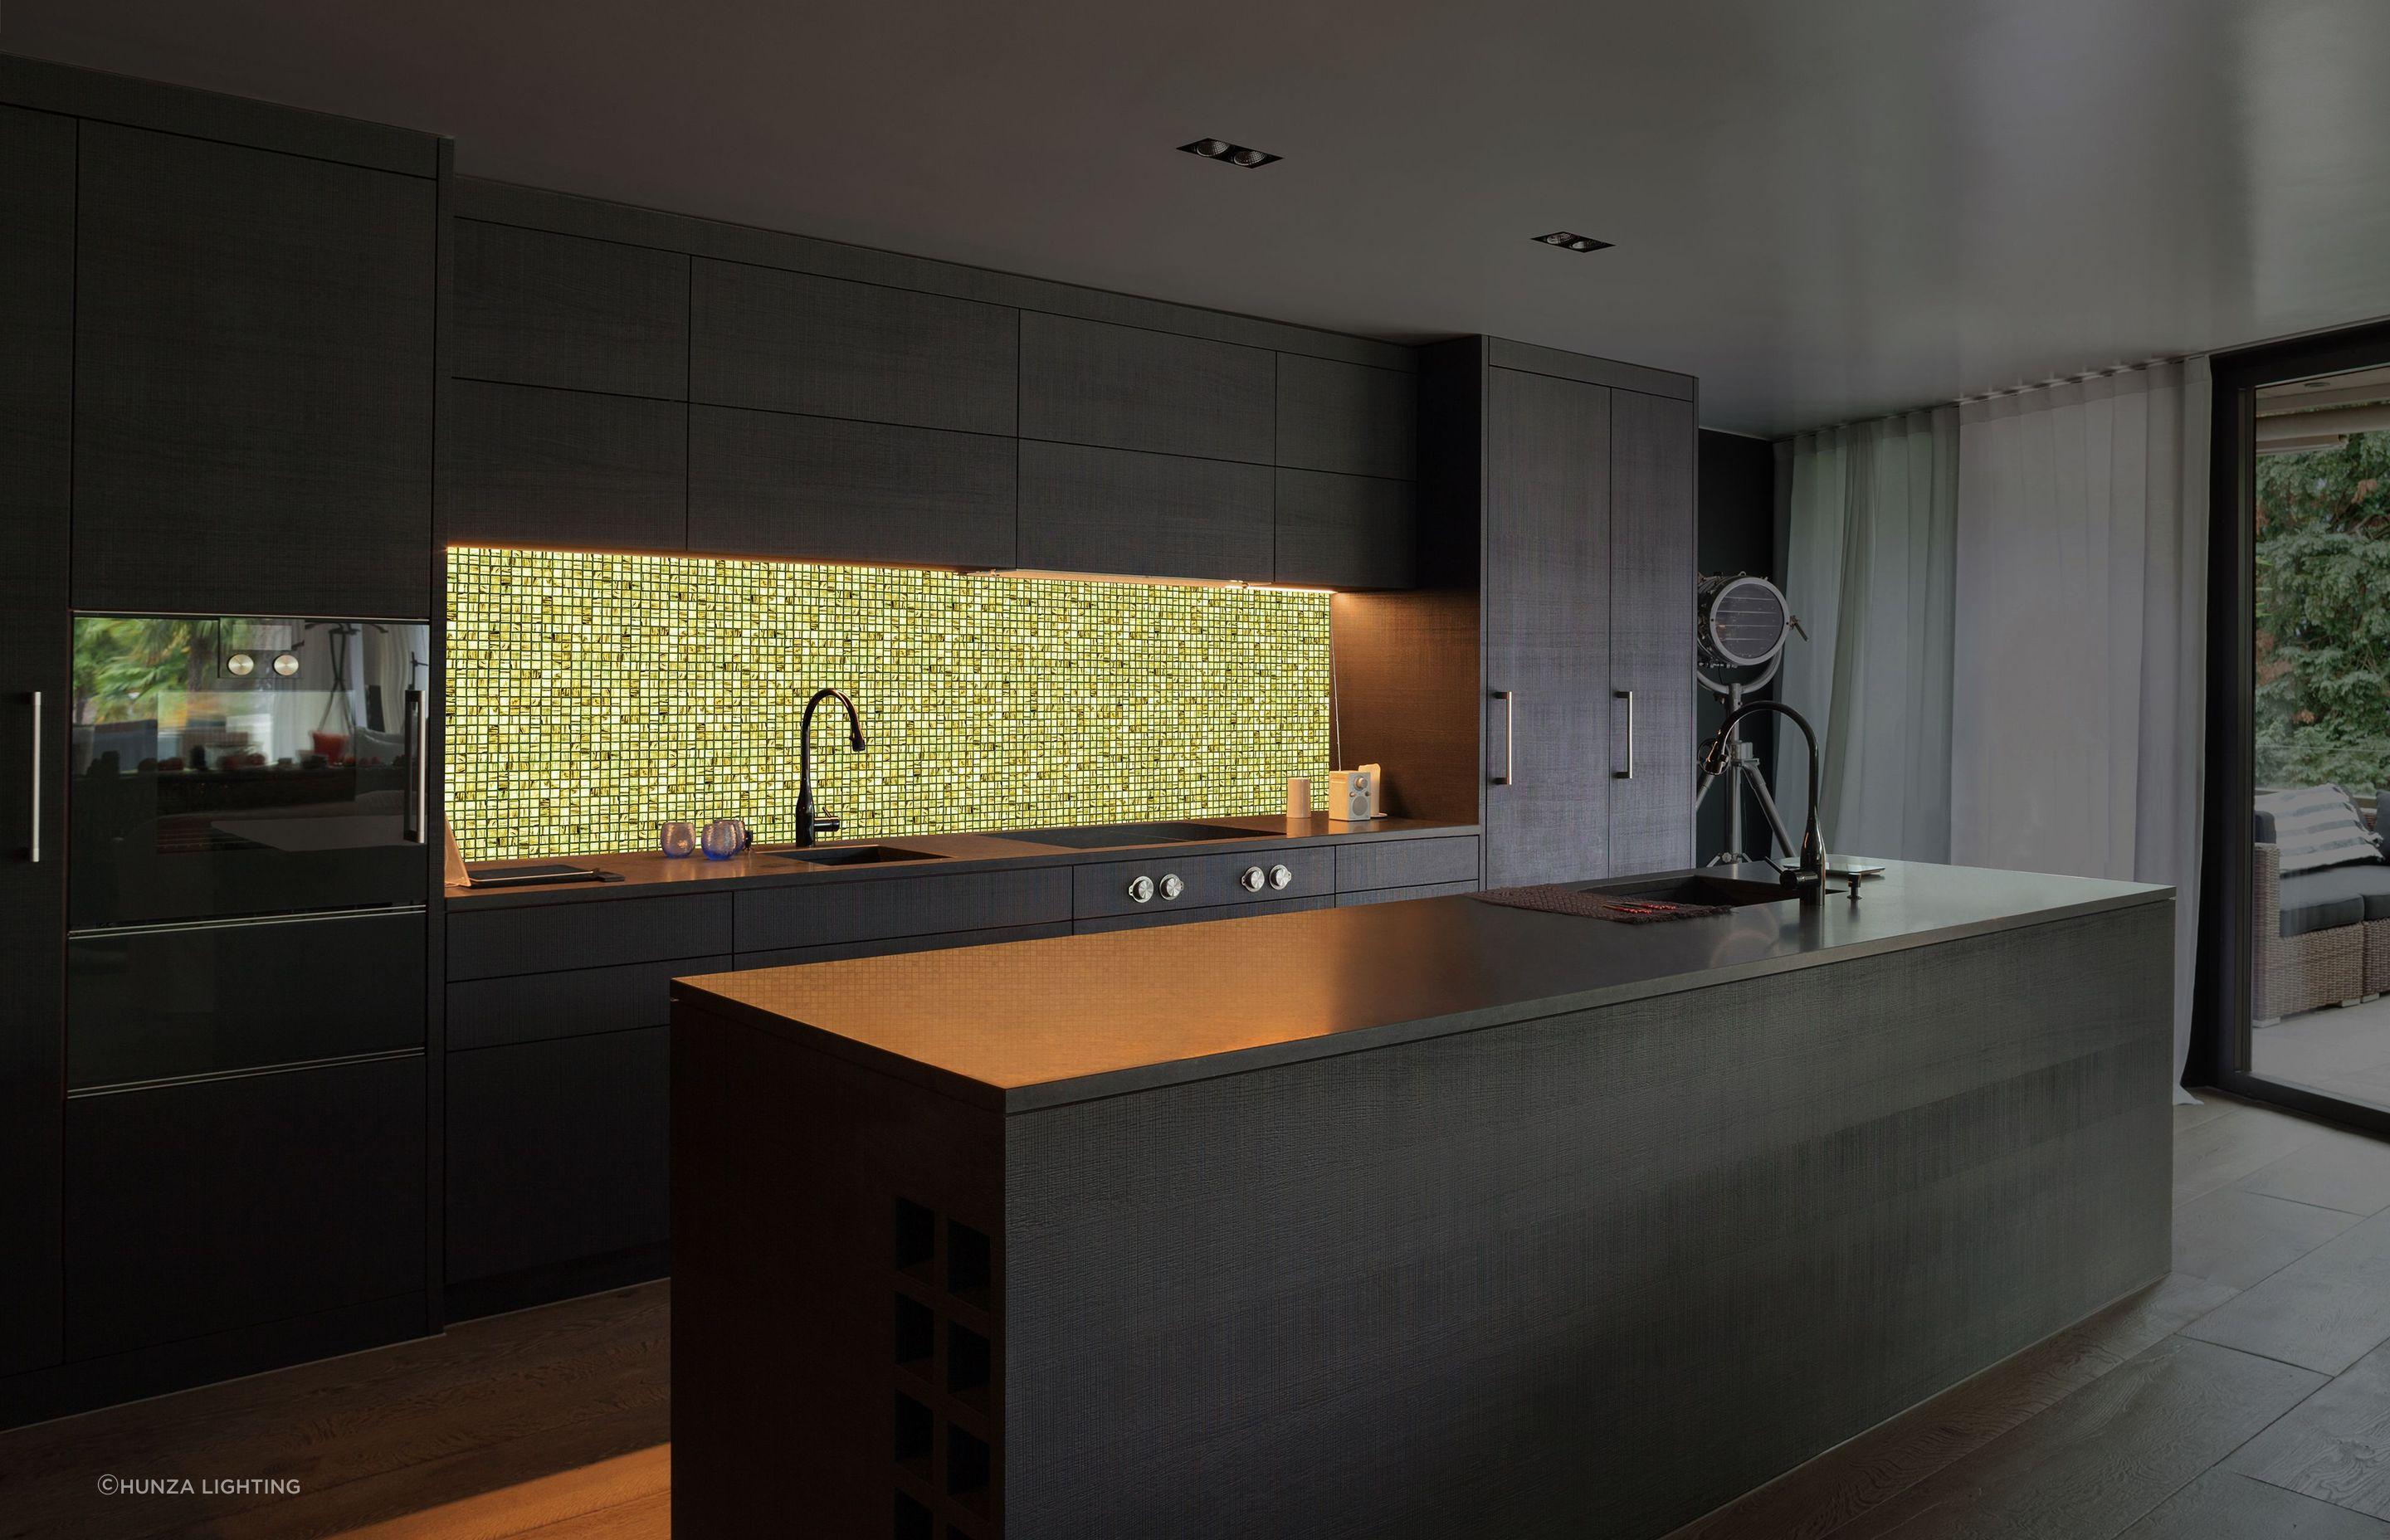 Volatiles Interactive LED Light with kitchen installation from Hunza Lighting